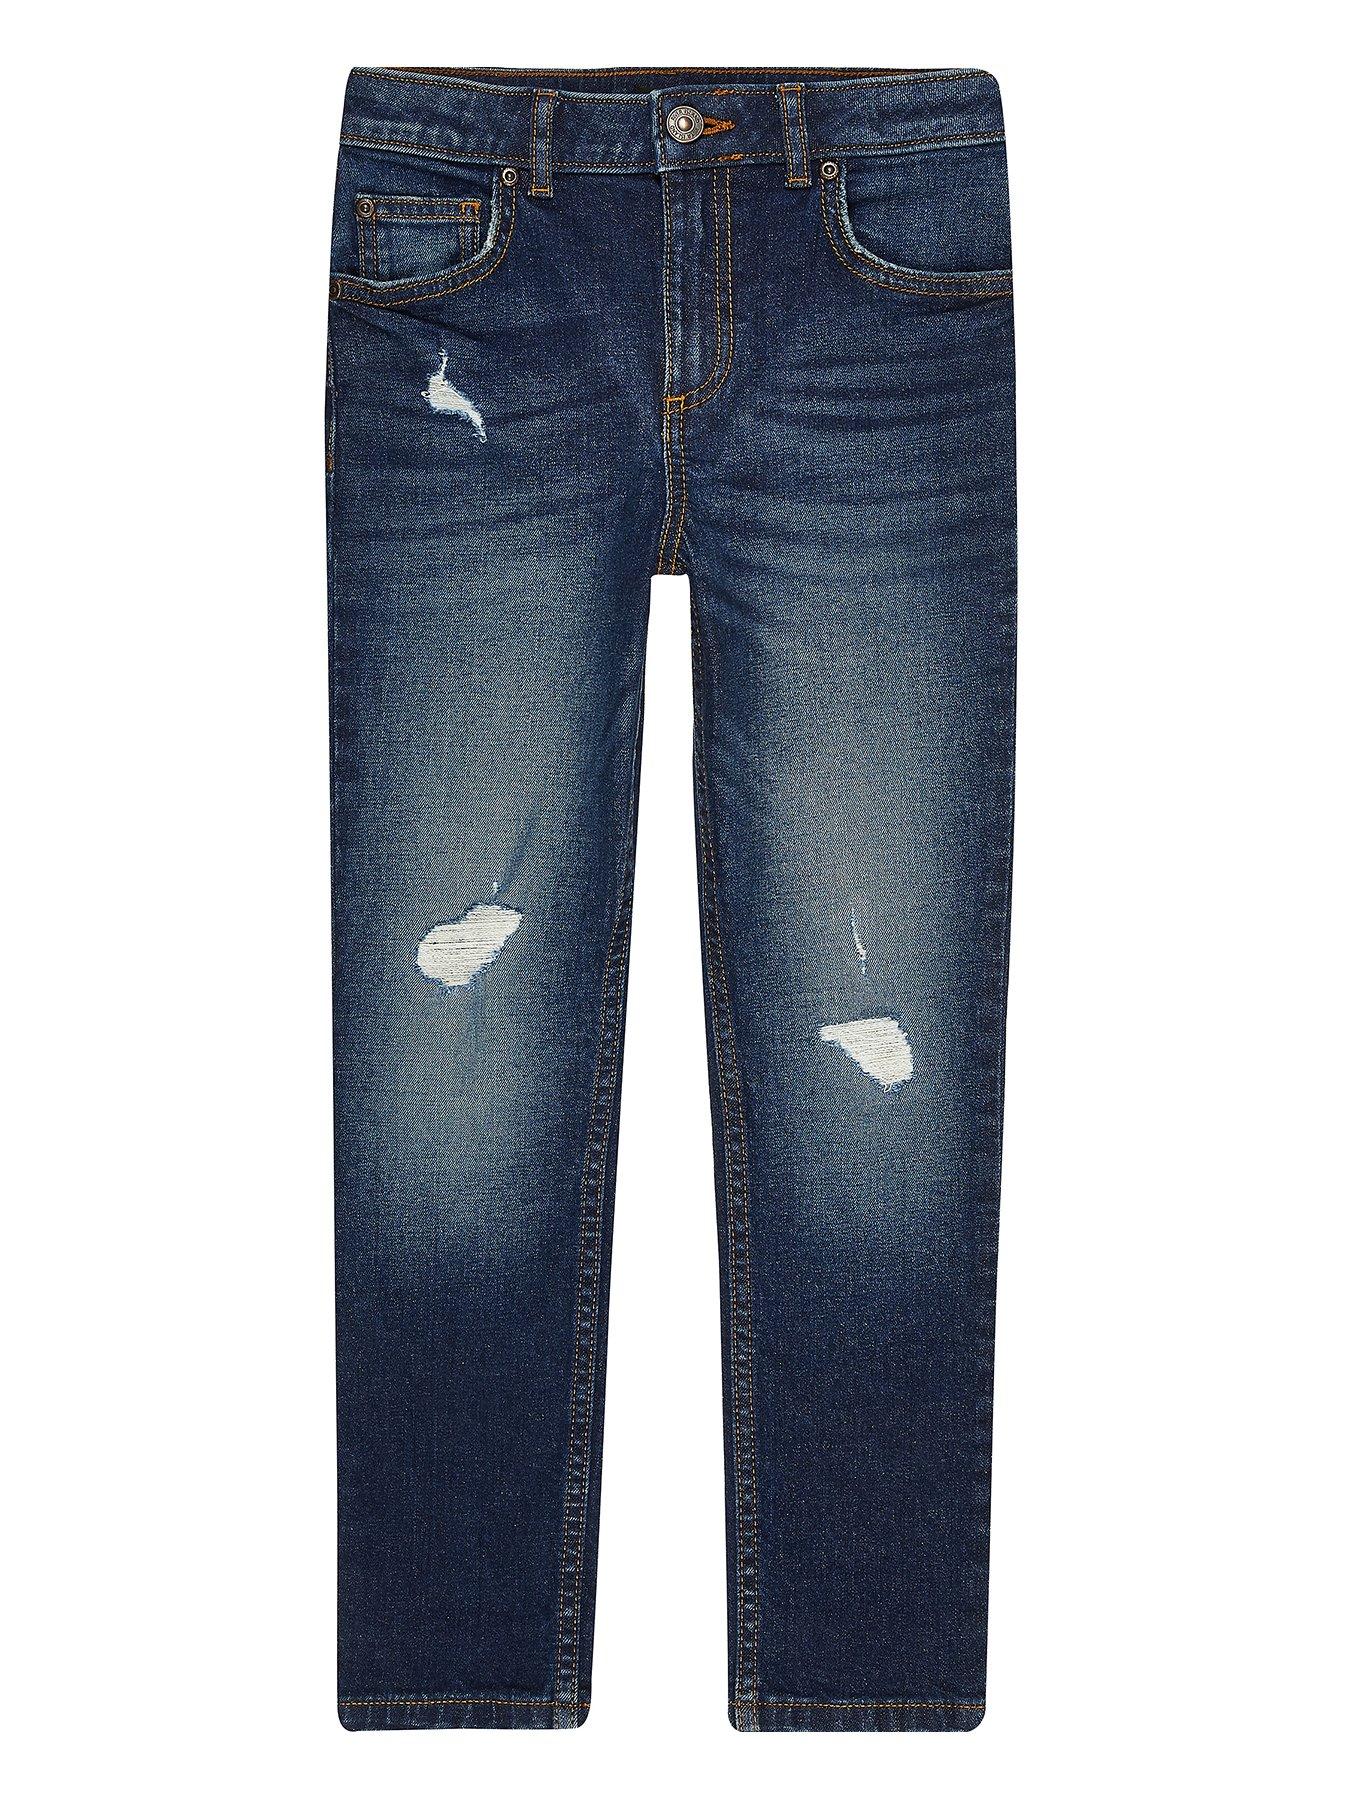 river island distressed jeans